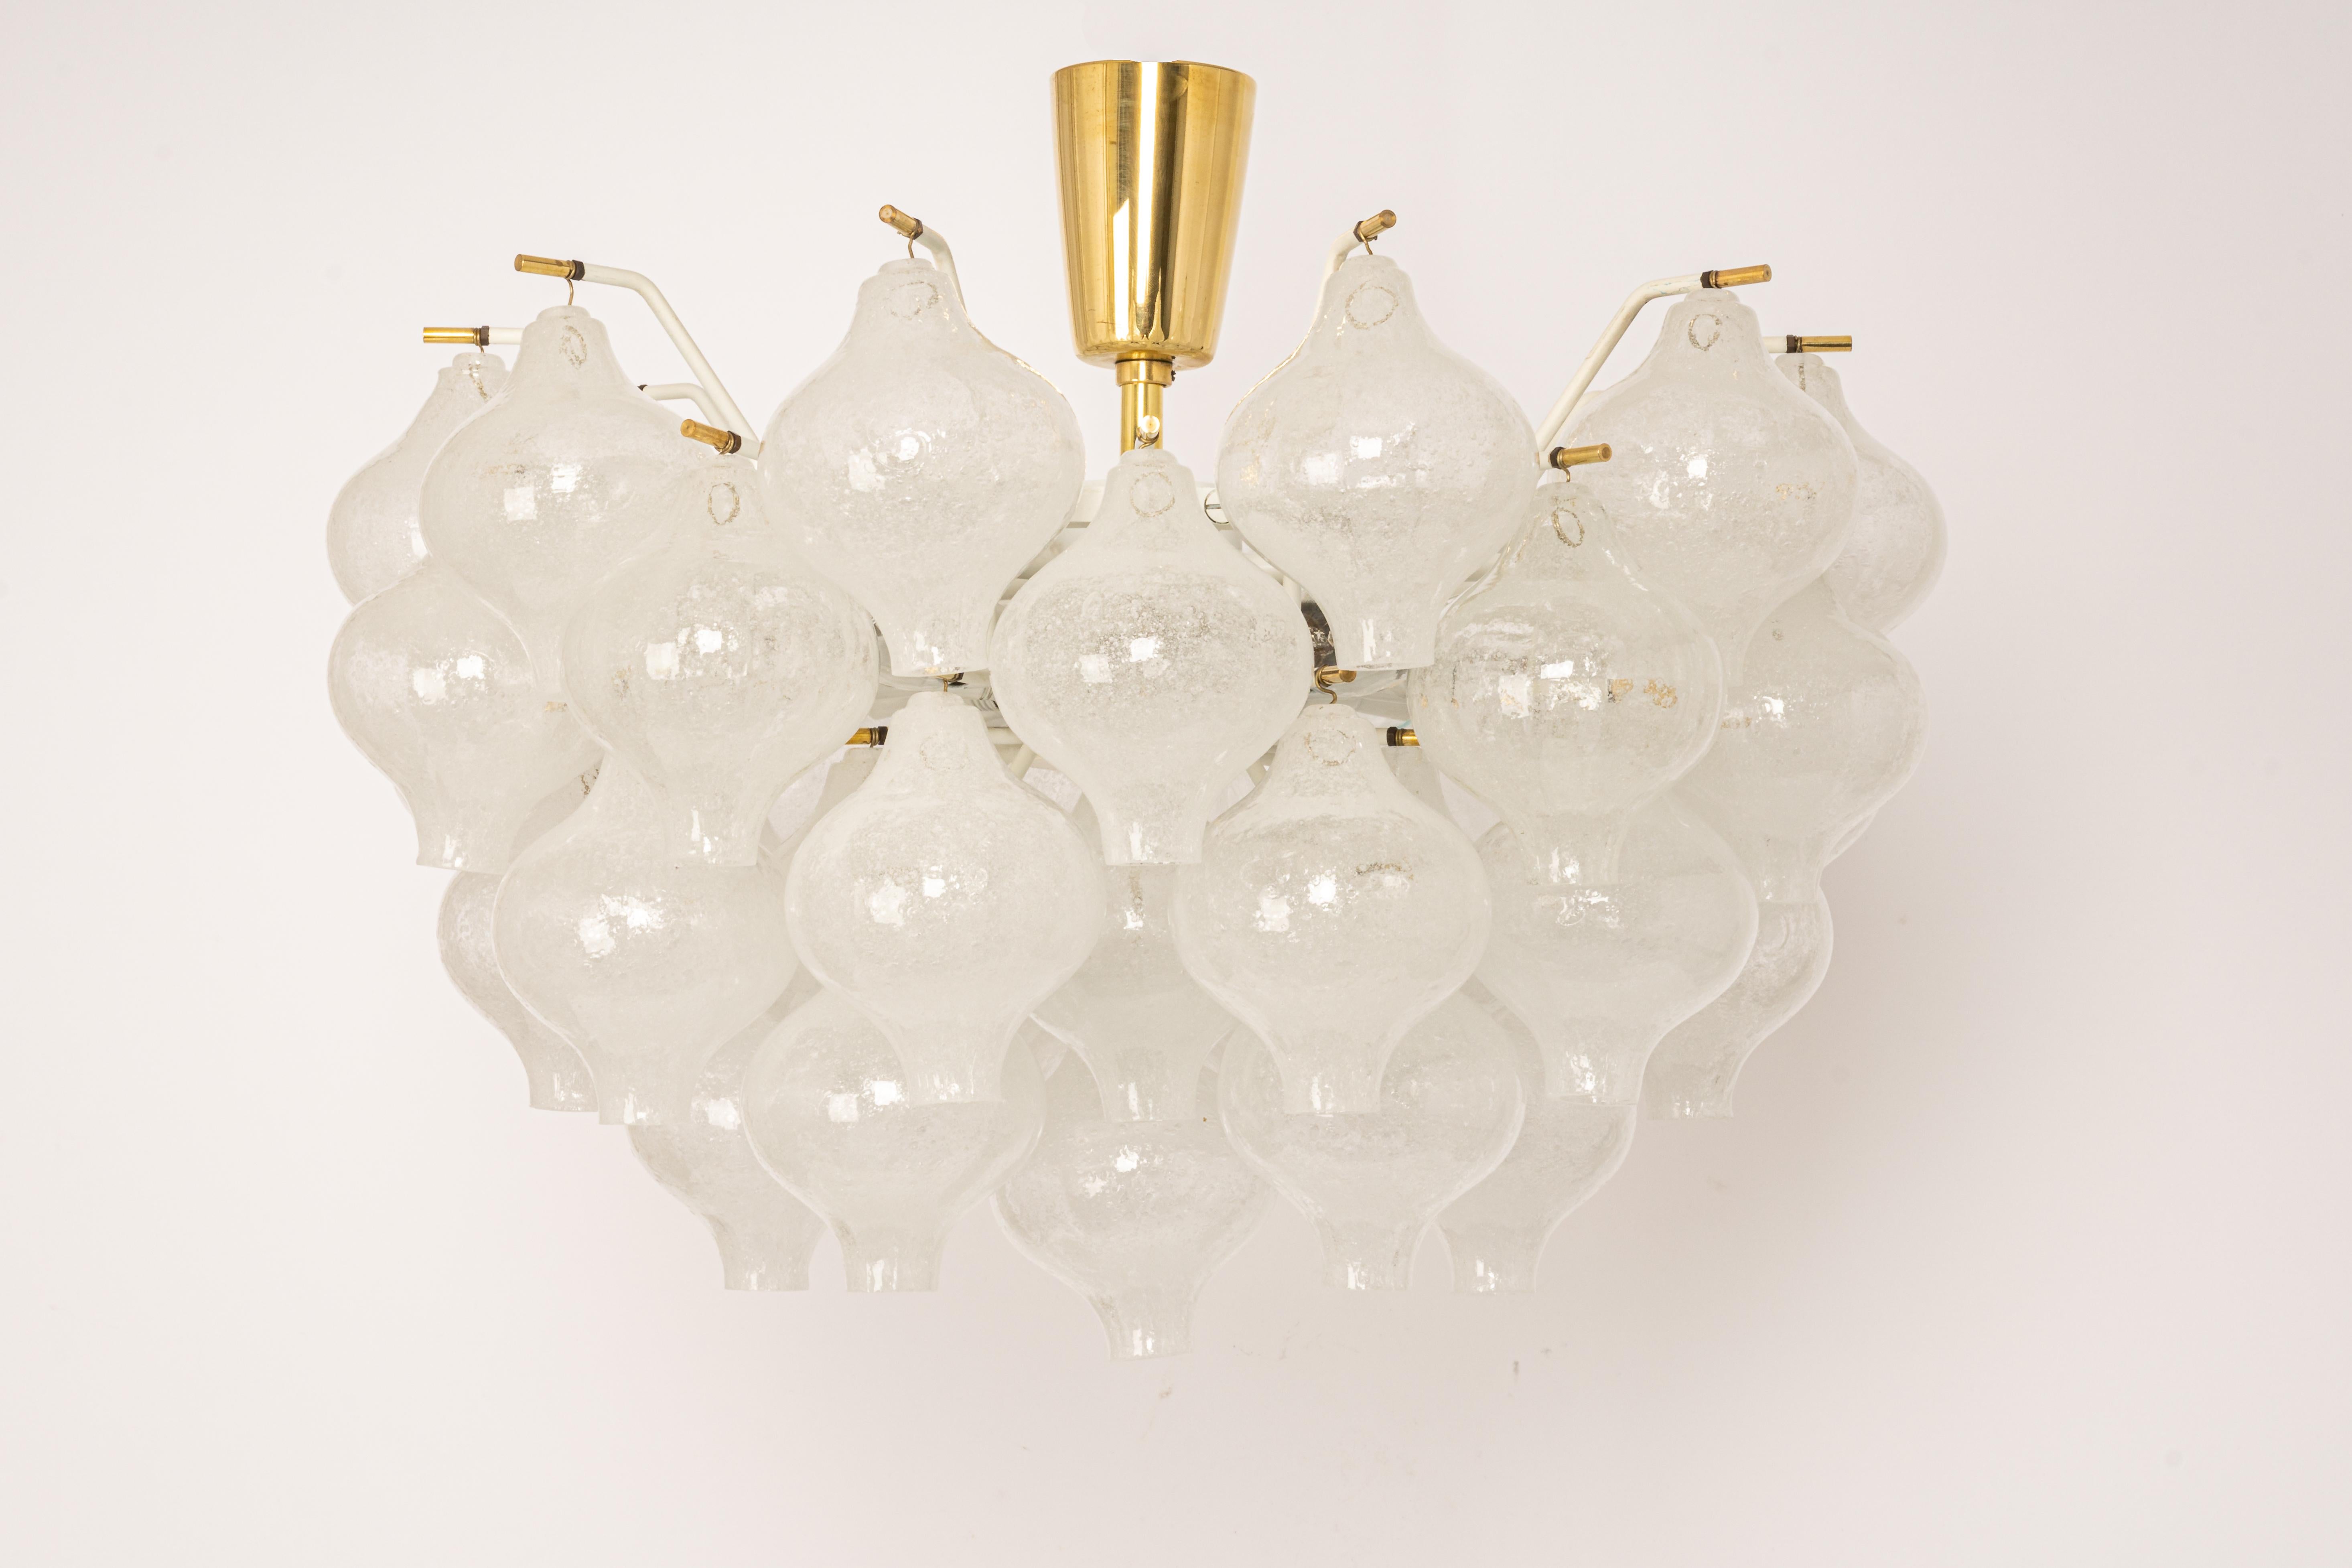 Wonderful onion-shaped -Tulipan glass chandelier or flush mount. A large number of hand-blown glasses suspended on a white painted metal frame and brass center rod.
Best of design from the 1960s by Kalmar, Austria. High quality of the